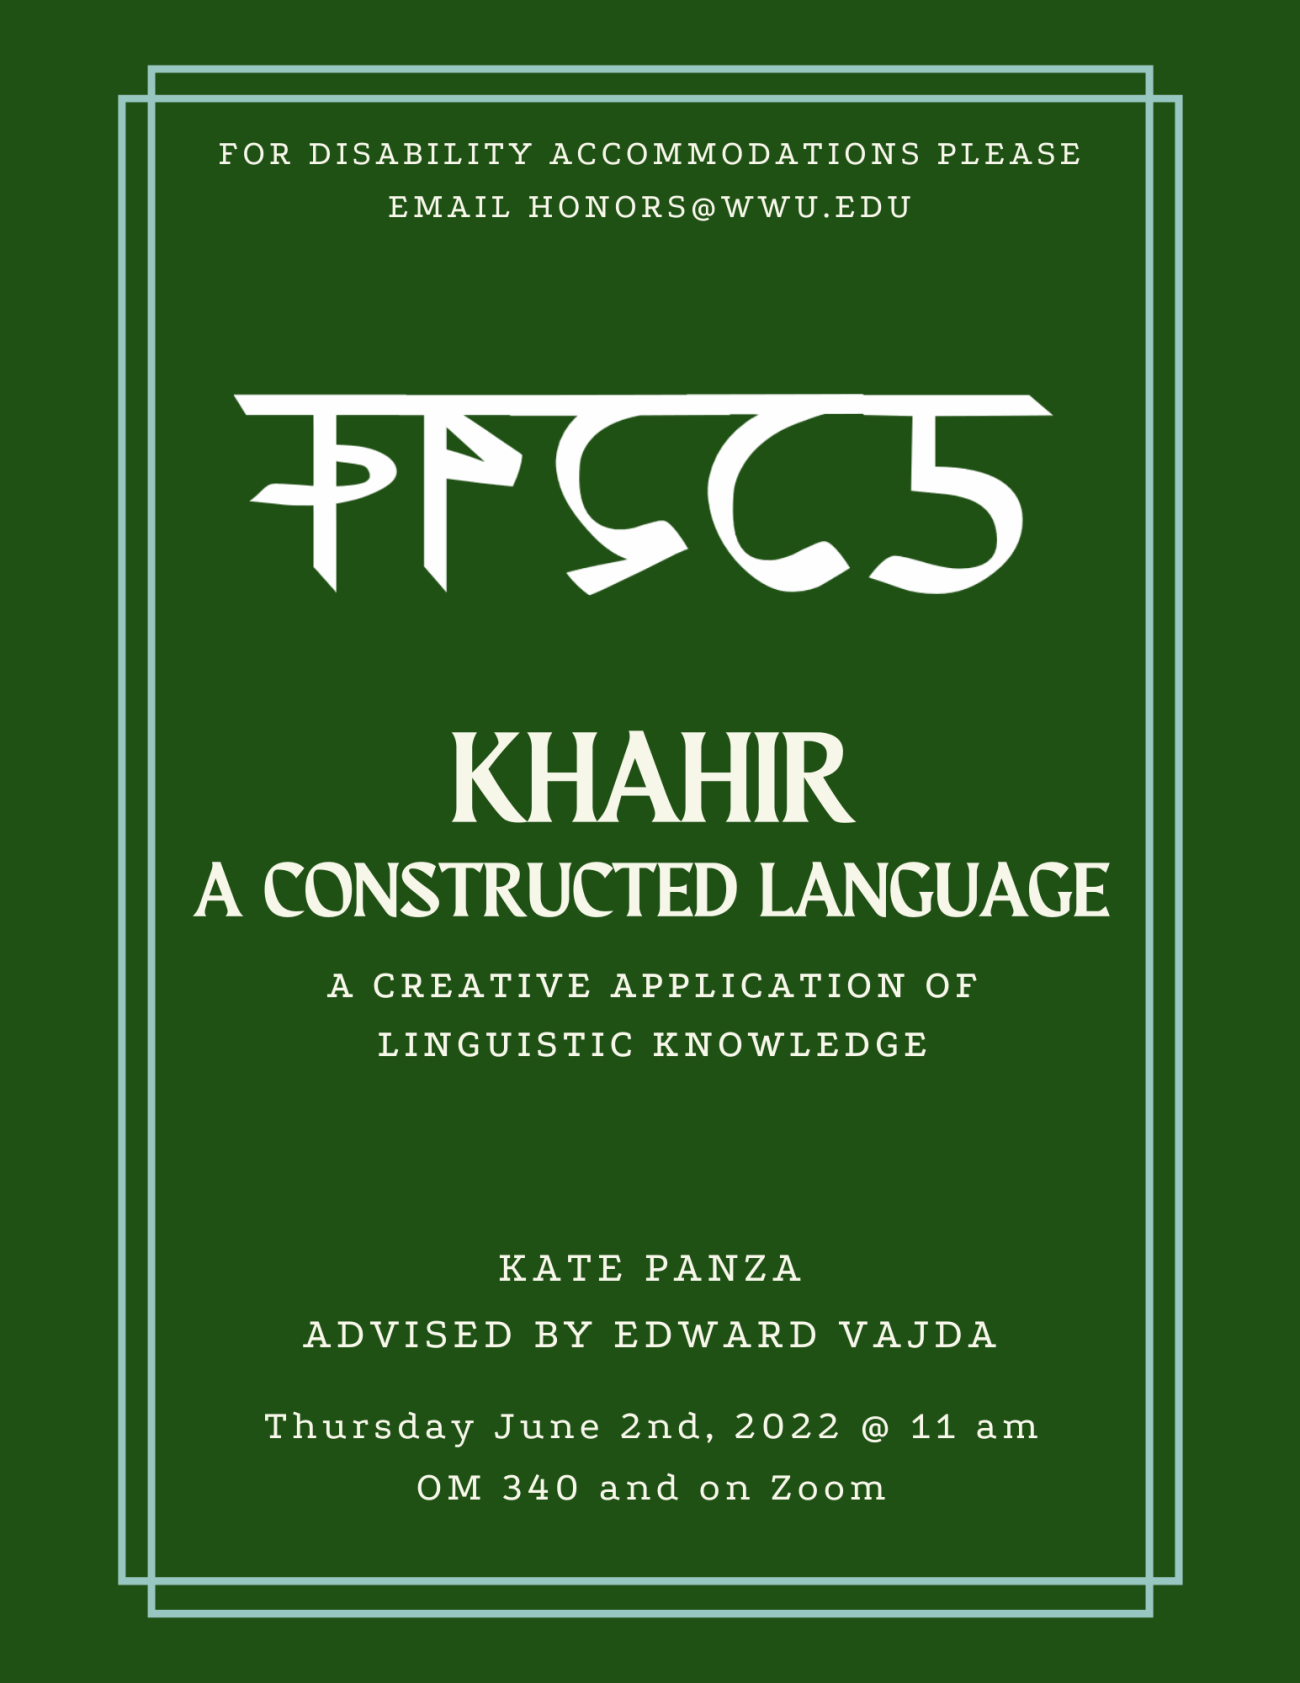 Dark green poster containing a foreign script with a horizontal line that runs across the top of its symbols, It is surrounded by a light green border. The text reads "Khahir: A Constructed Language. A creative application of linguistic knowledge. Kate Panza, advised by Edward Vajda. Thursday June 2nd, 2022 @ 11 am, OM 340 and on Zoom. For Disability Accommodations please email honors@wwu.edu."